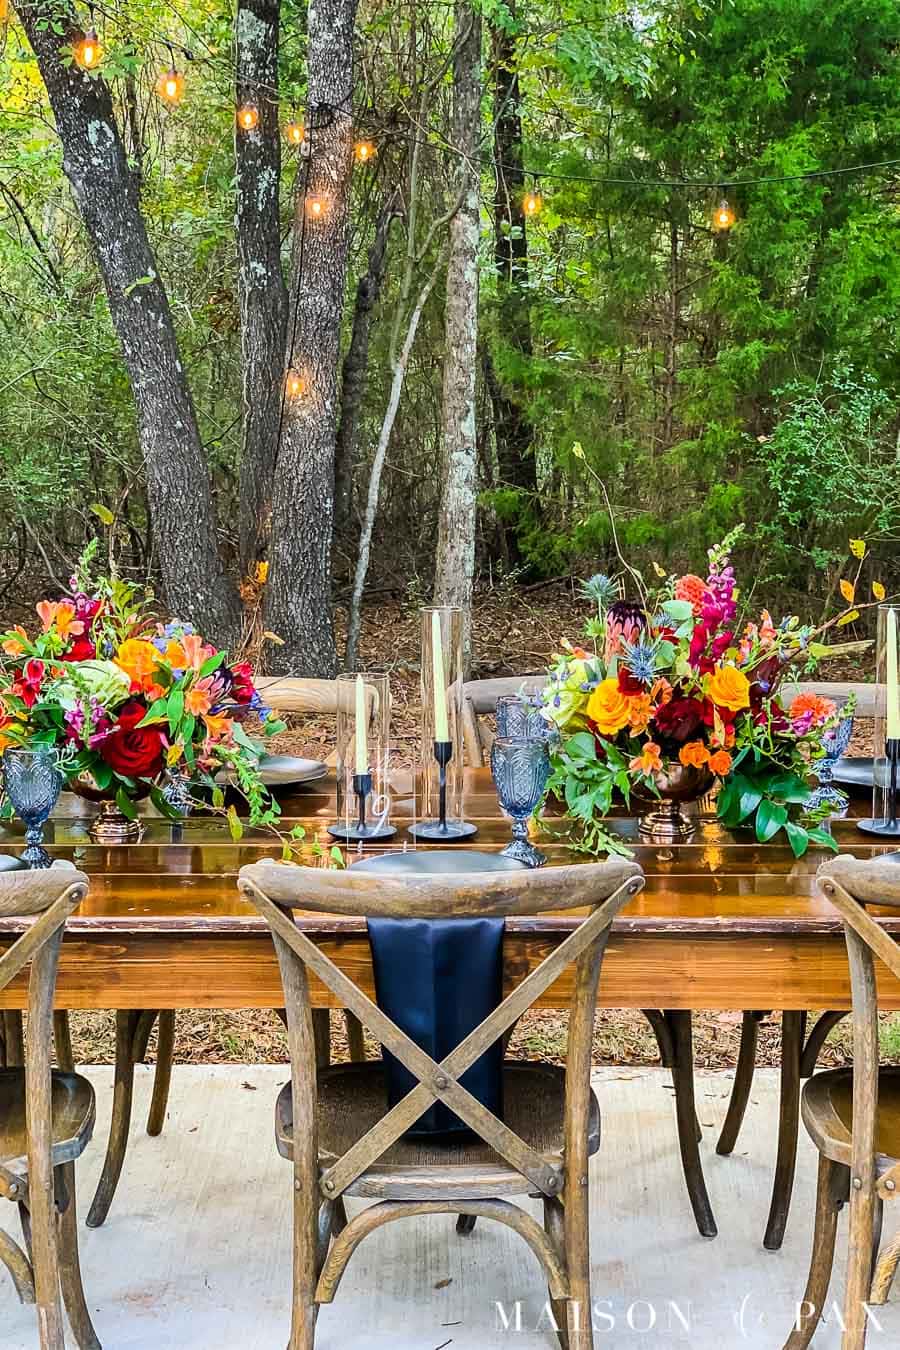 4 inspirational elements to create a rustic outdoor wedding table